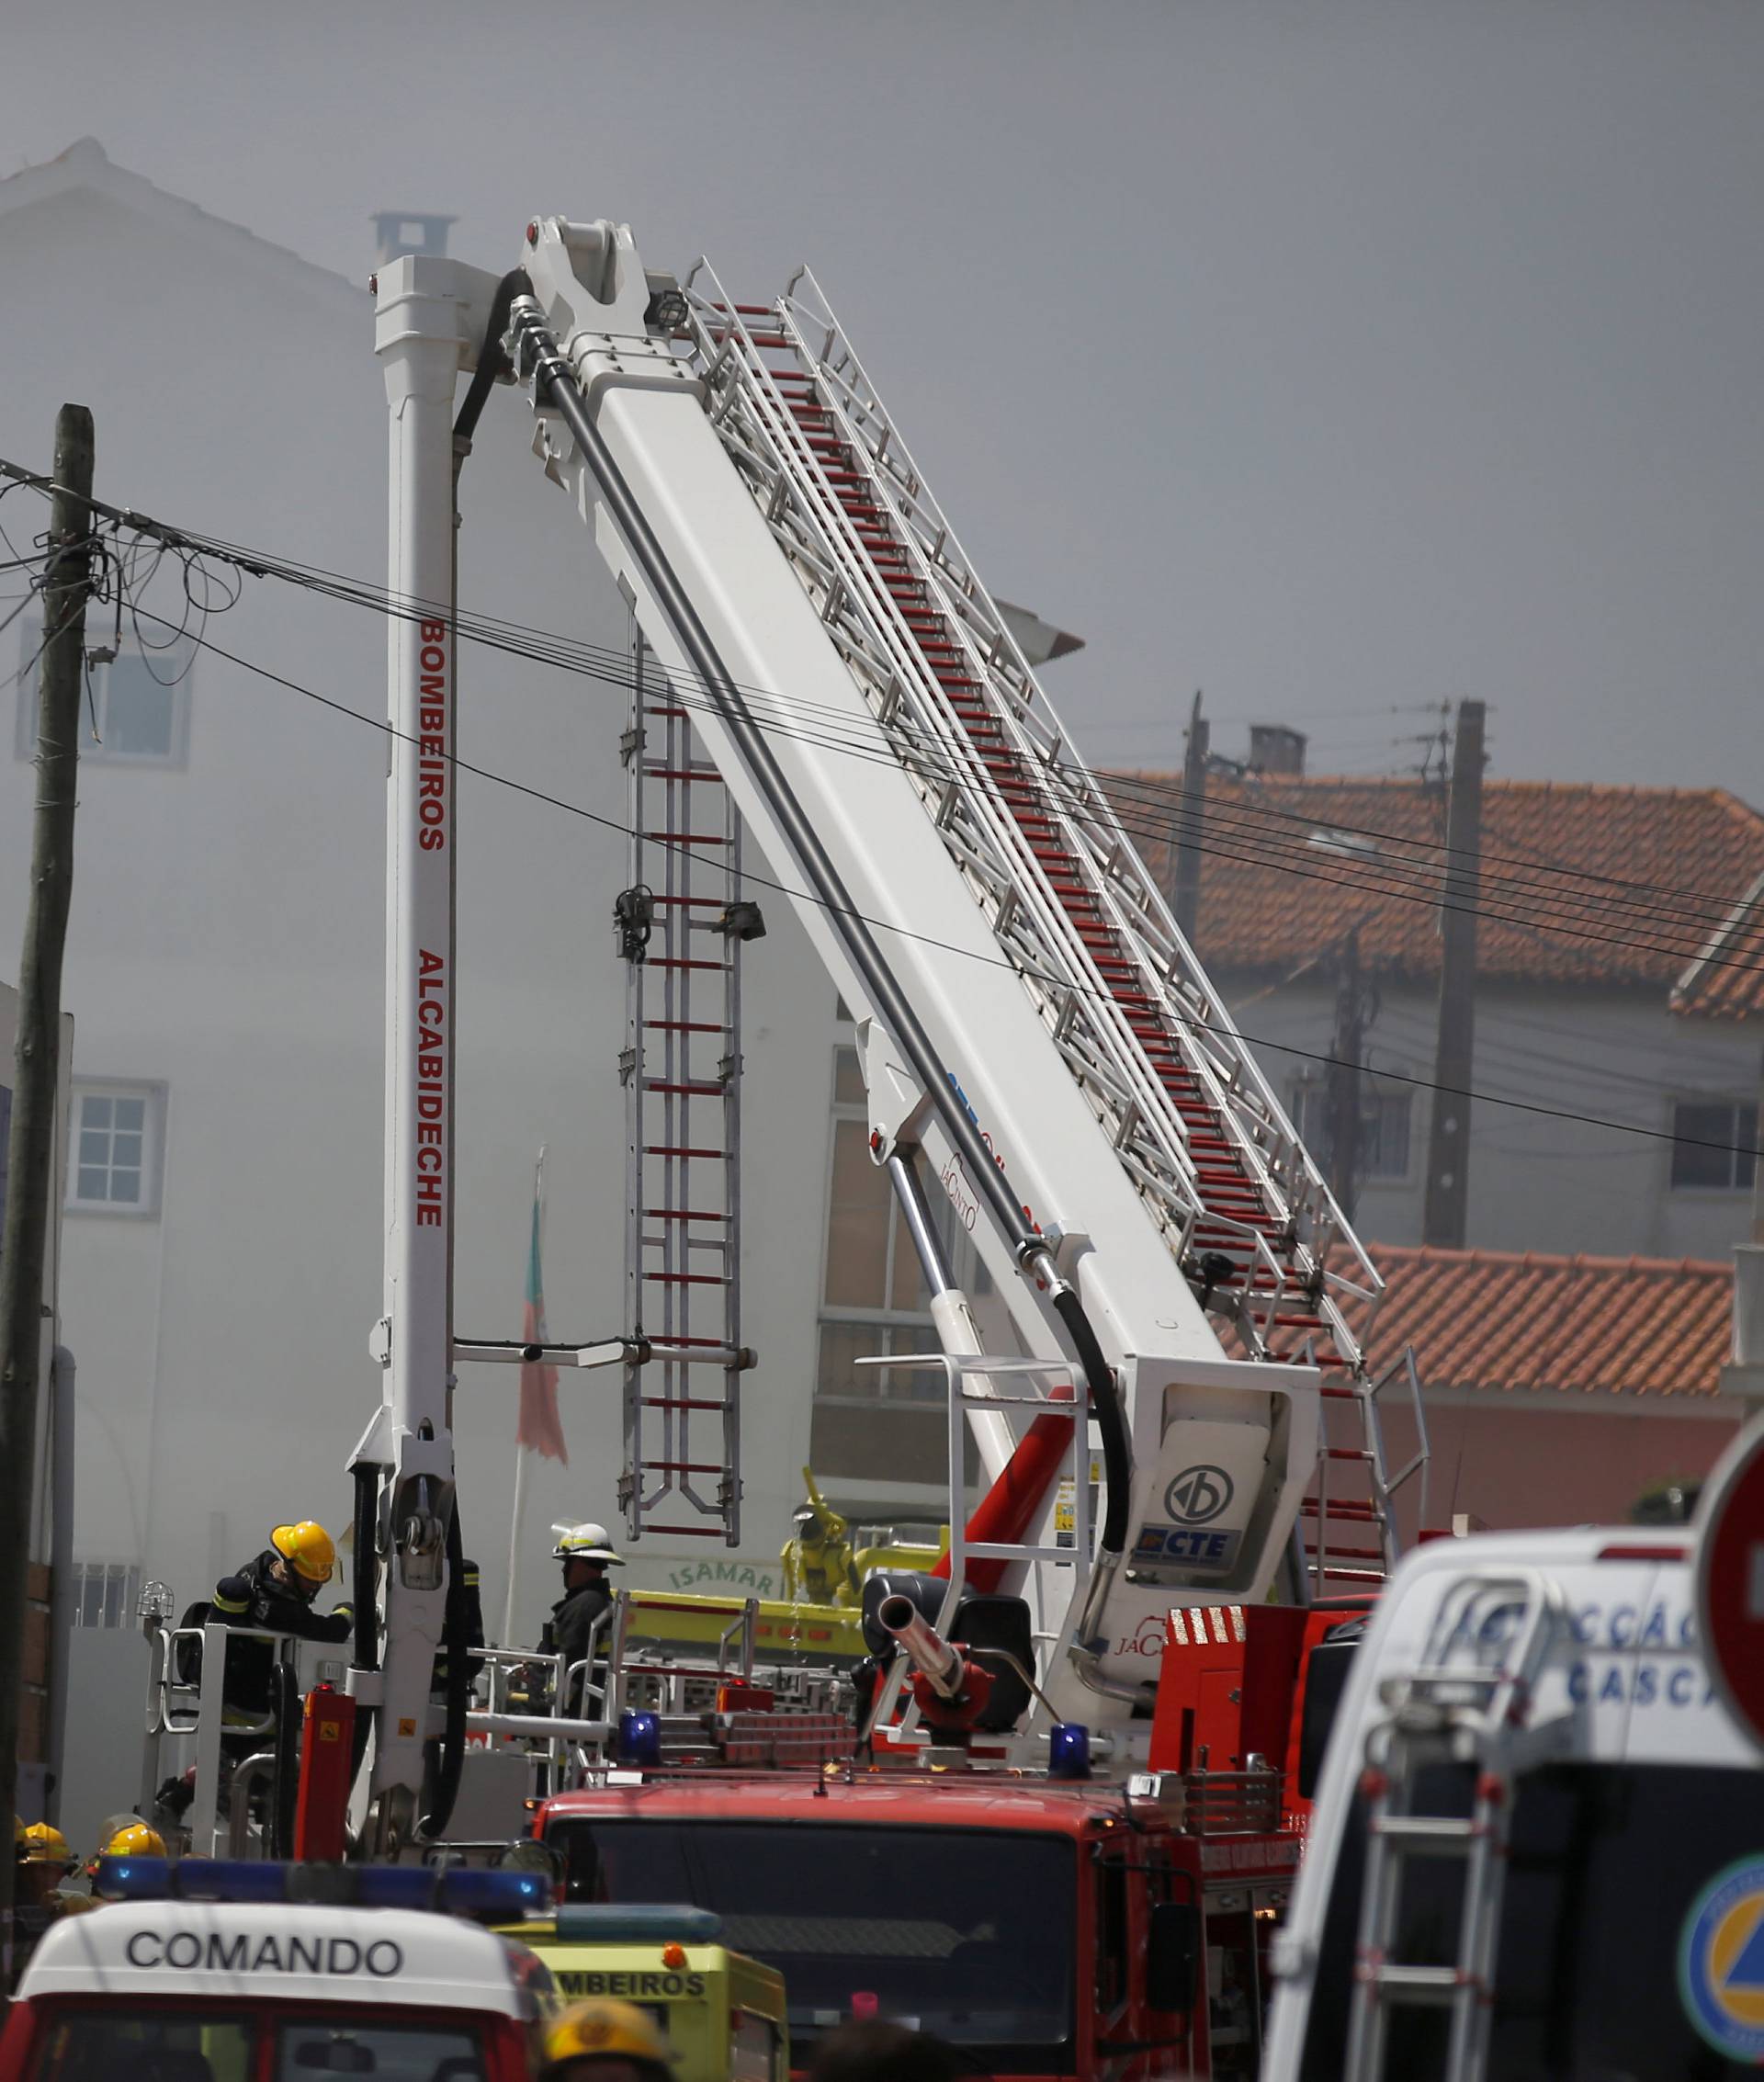 Firefighters work where a small airplane crashed near a supermarket in a residential area outside Lisbon